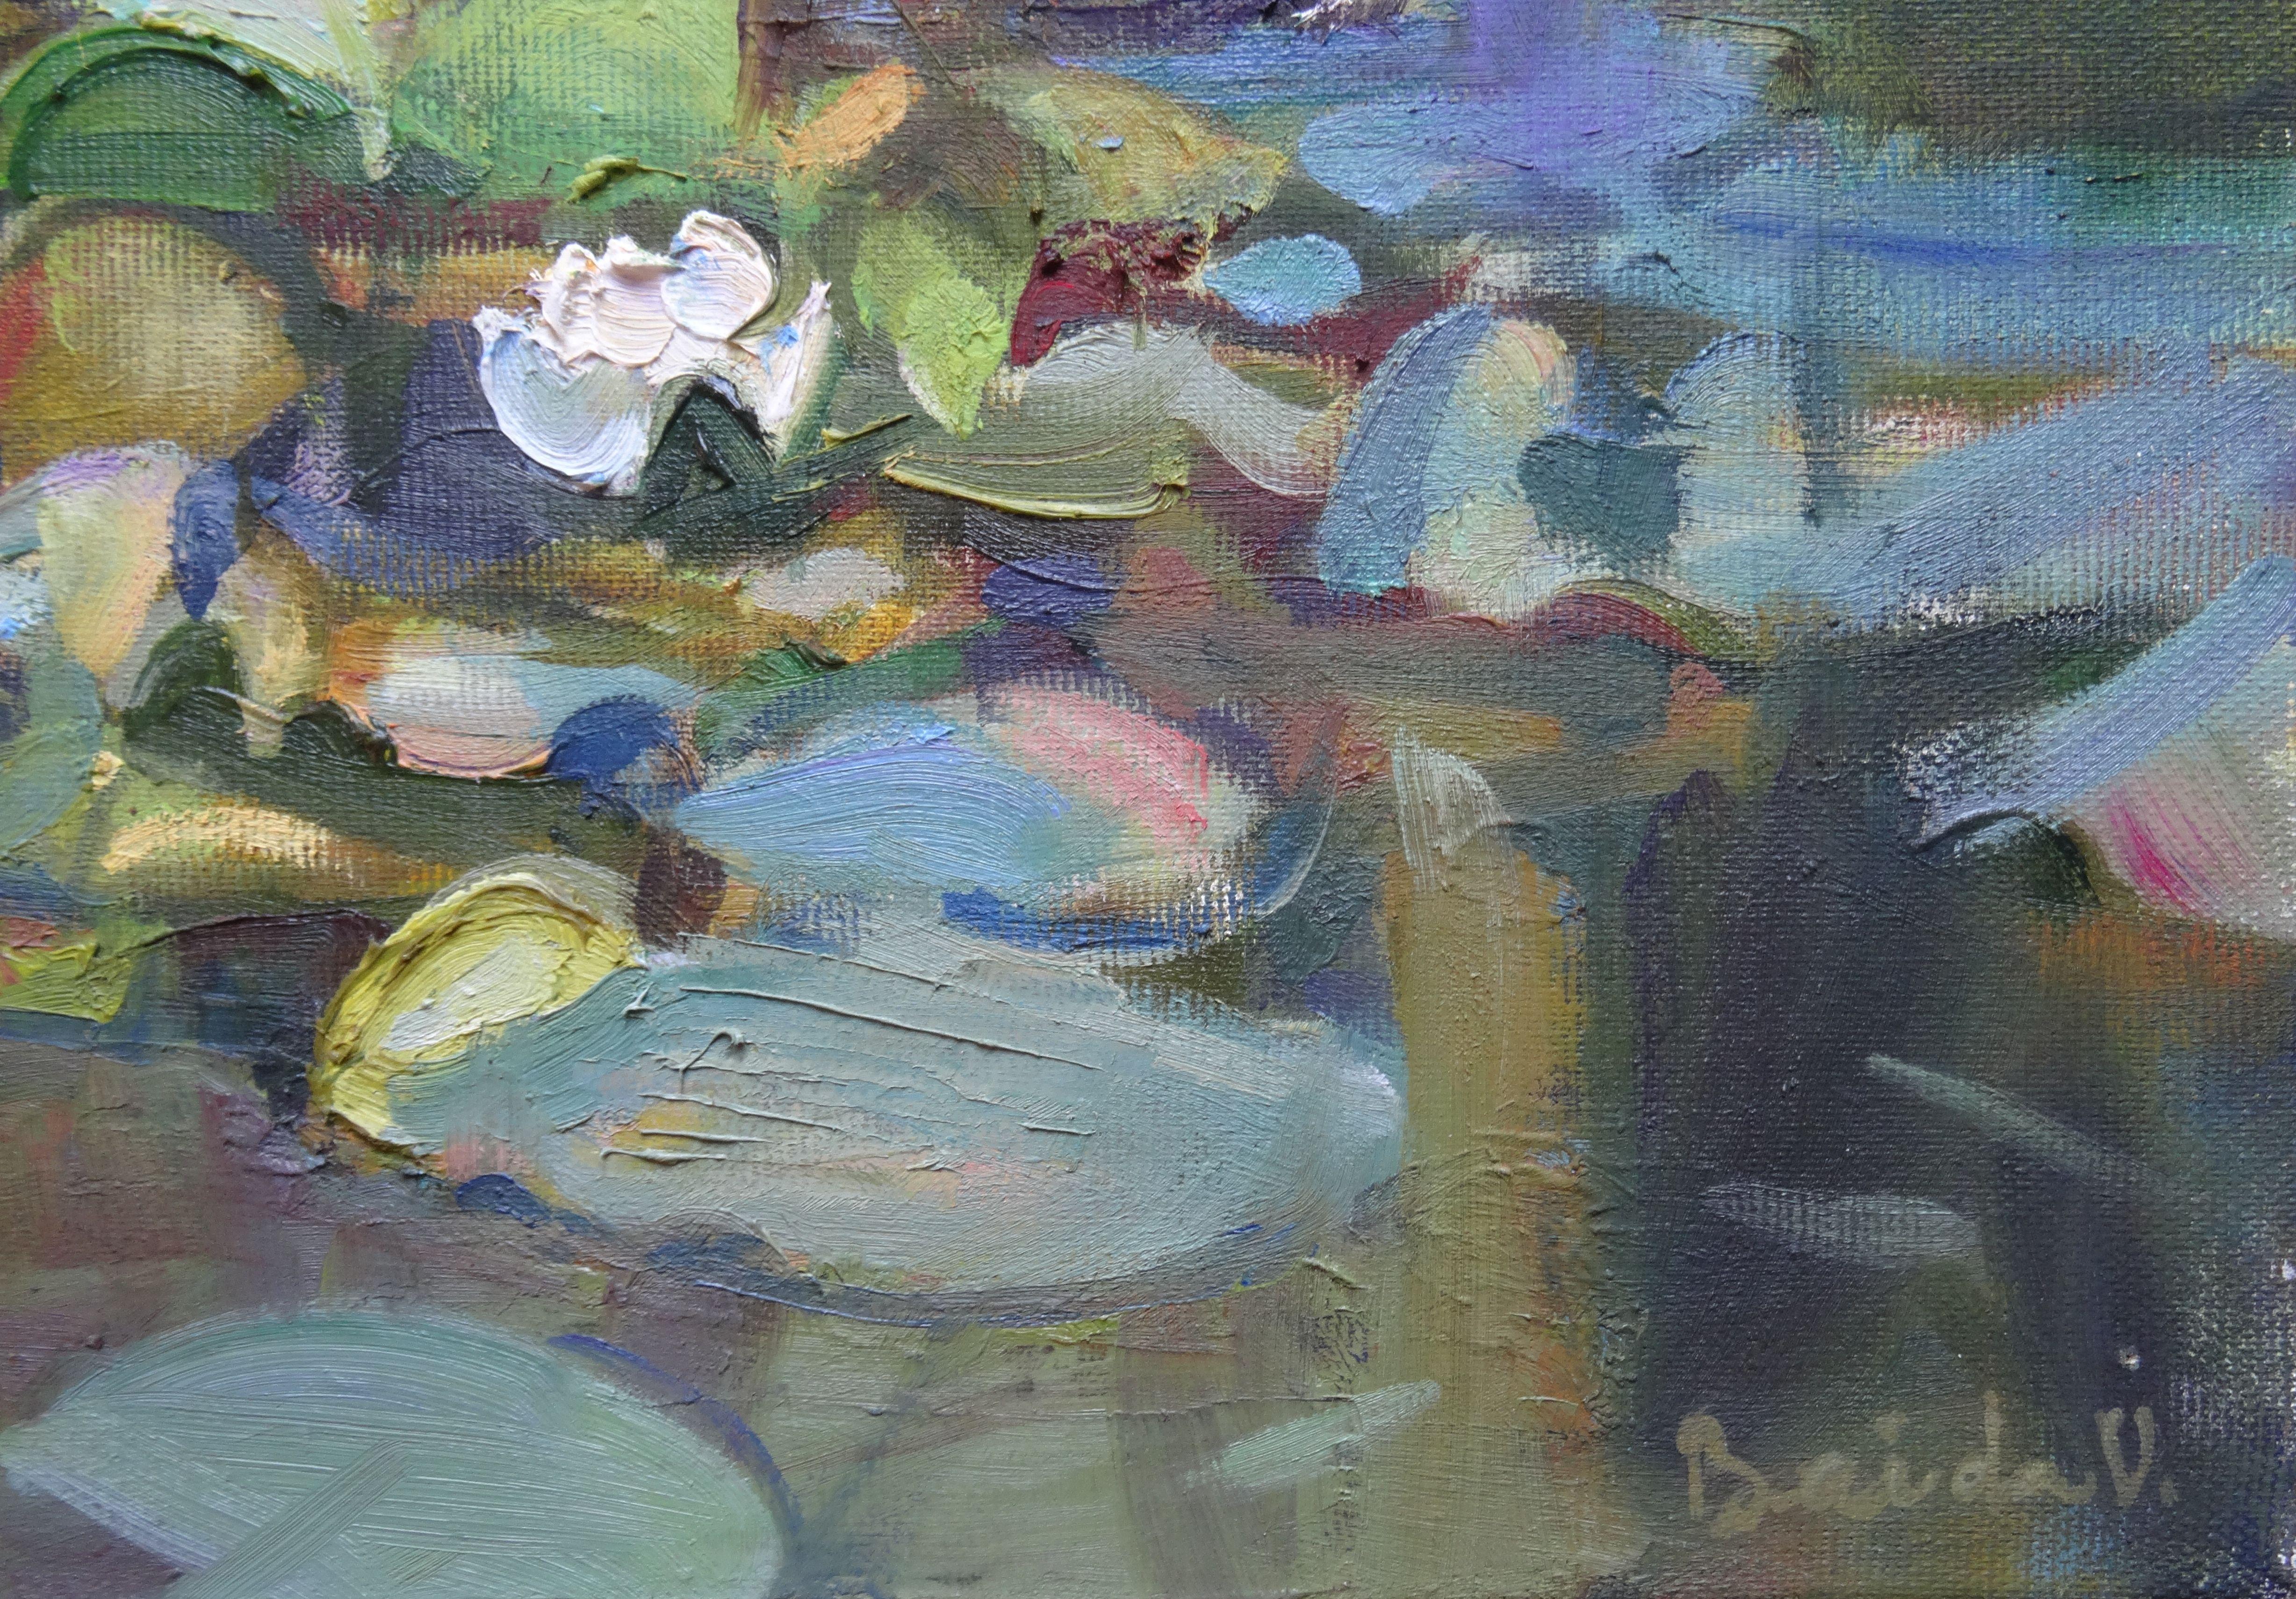 Water lilies. 2019. Oil on canvas, 40x80 cm - Painting by Valery Bayda 